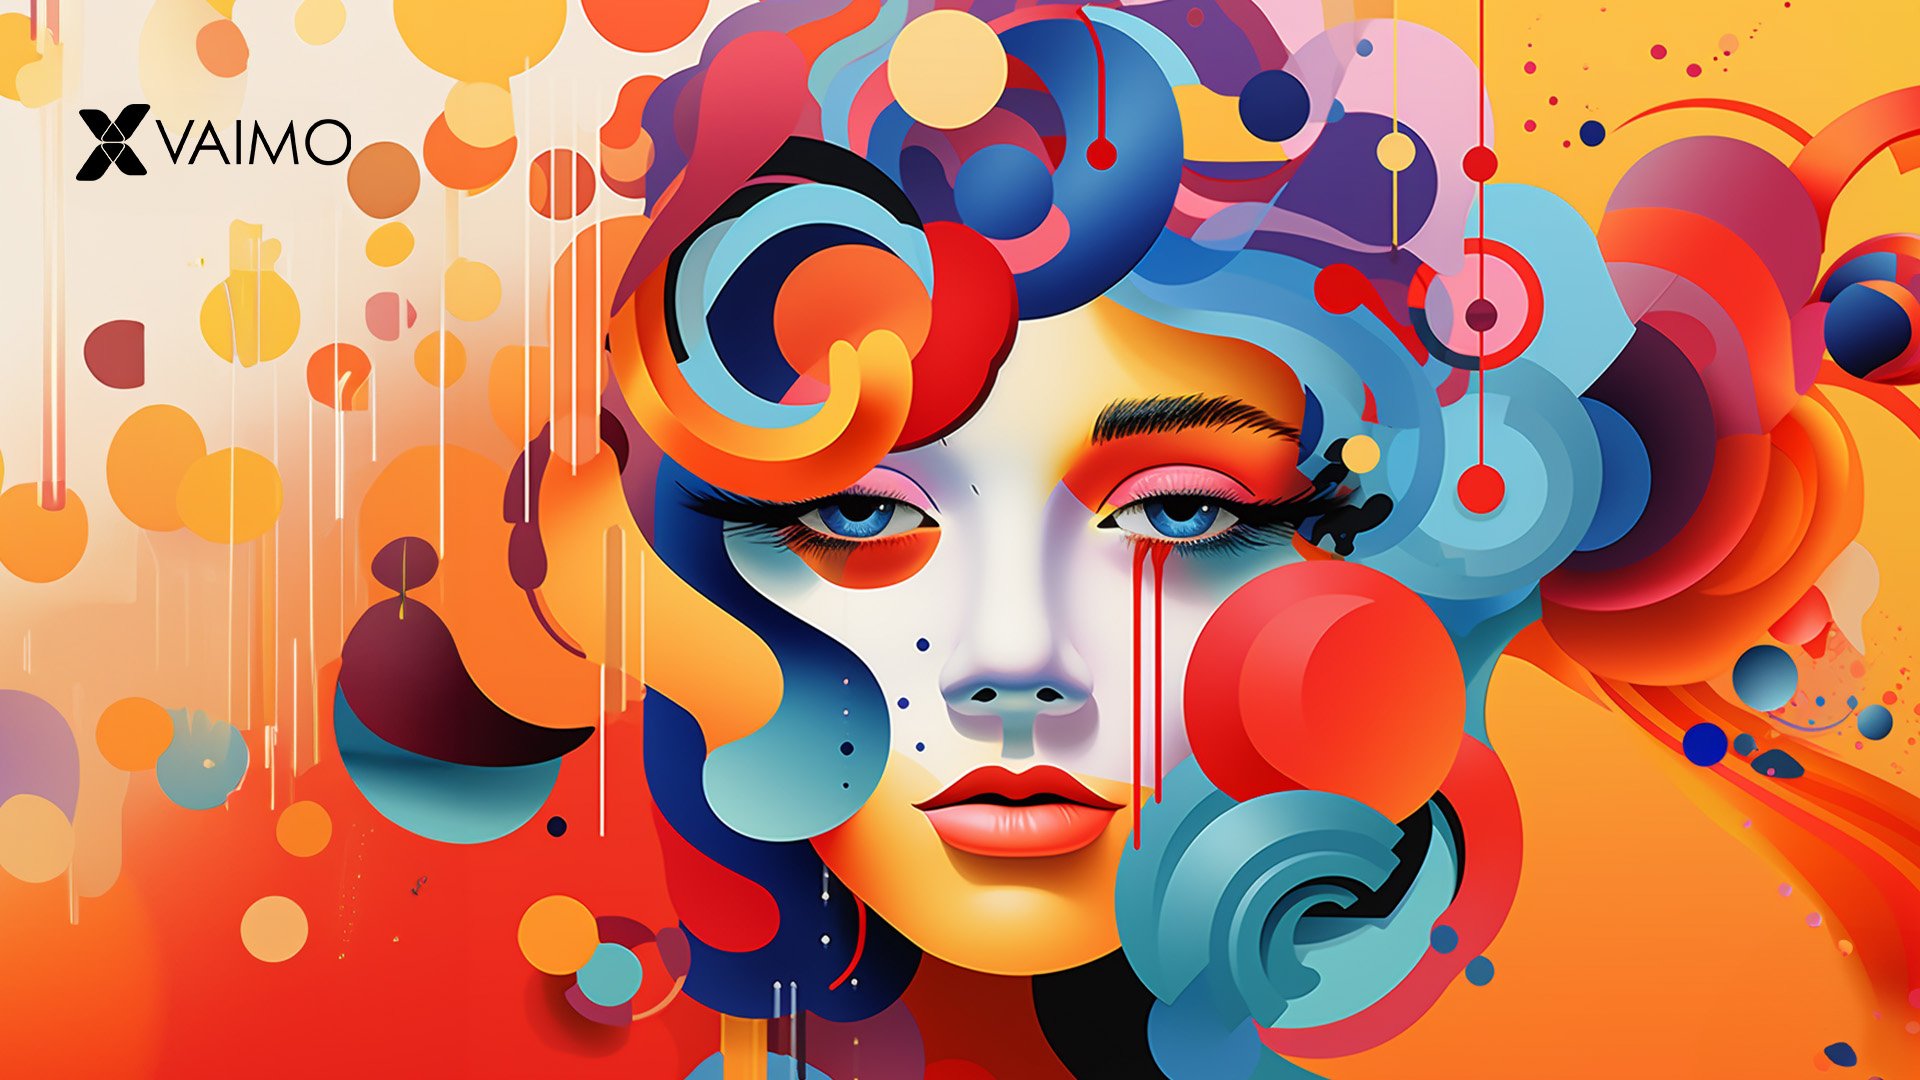 Abstract and colorful image showcasing woman's face